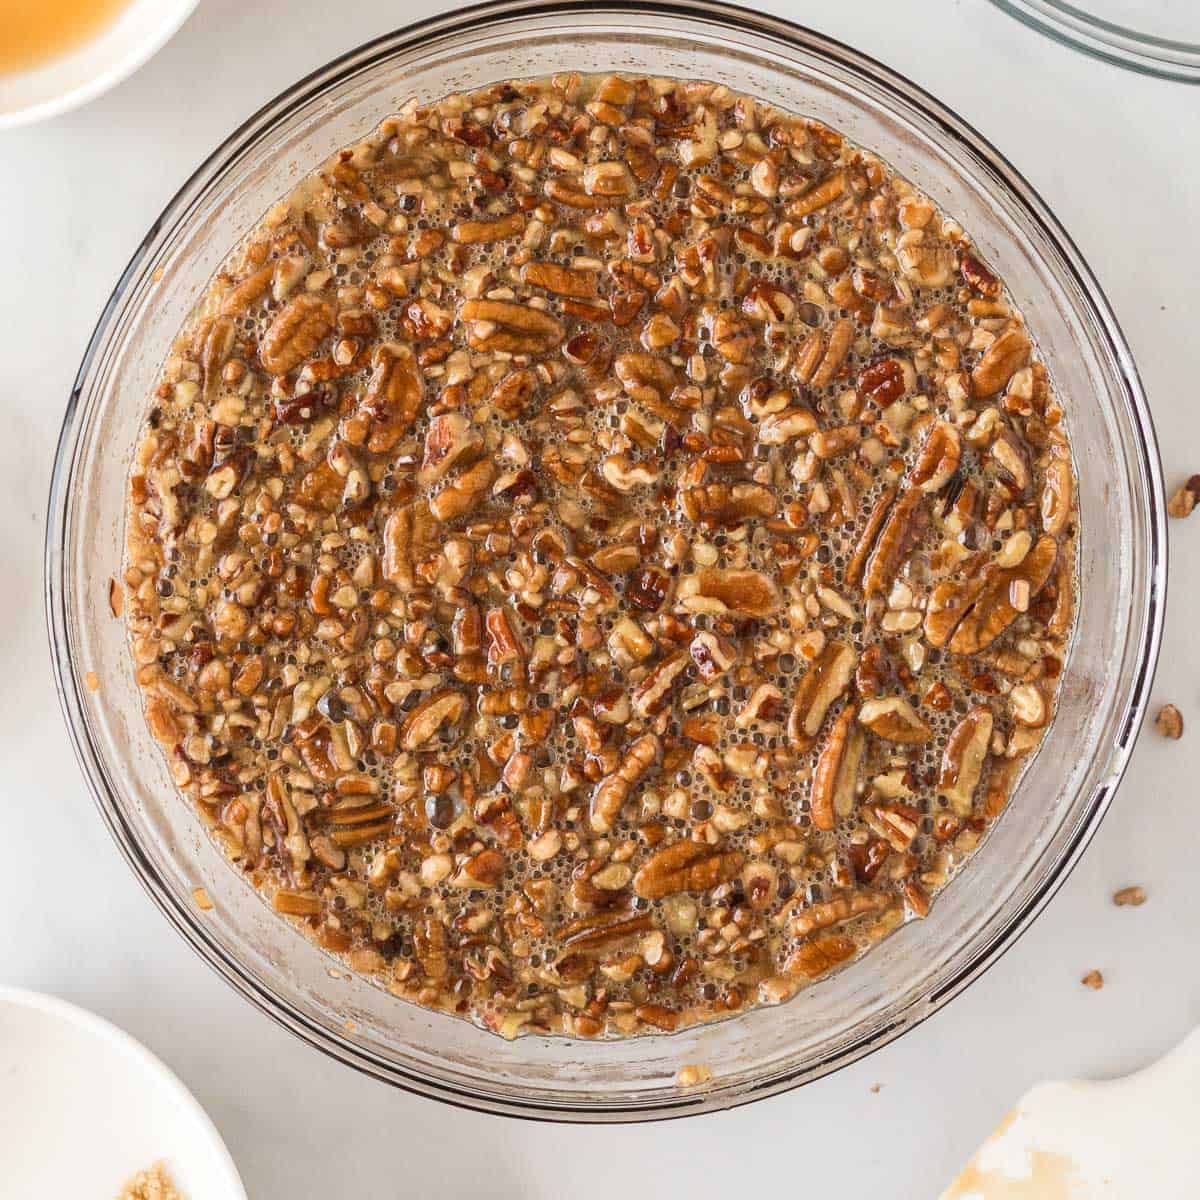 mixed together pecan pie filling